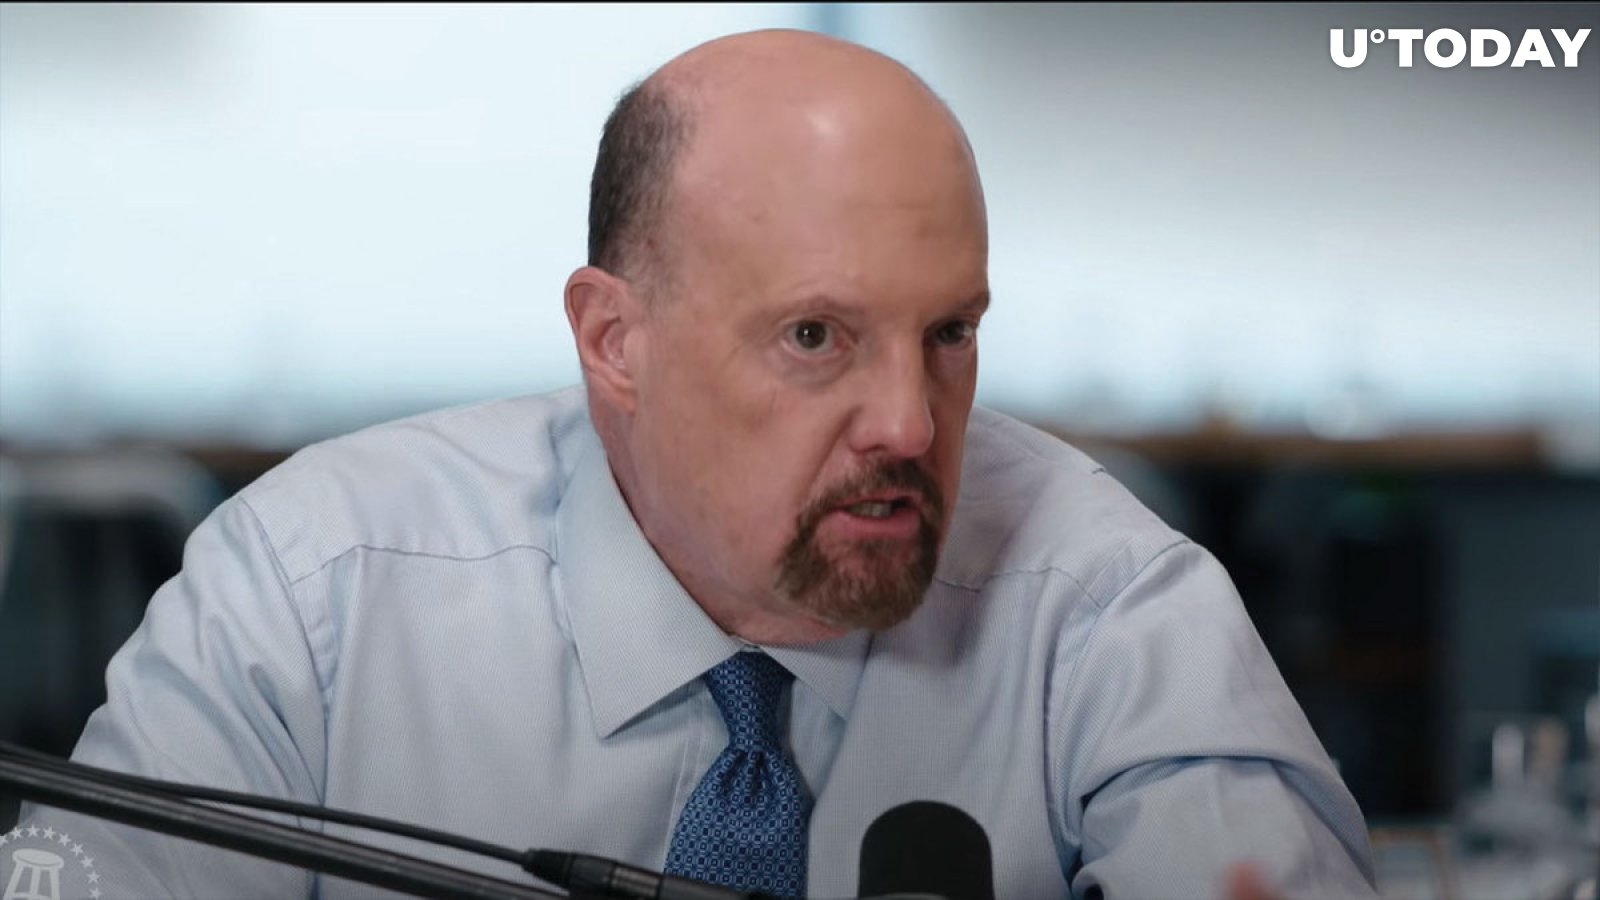 Jim Cramer Said He Has Been Awaiting 'The Big Sweep' in Crypto, Here's What He Meant